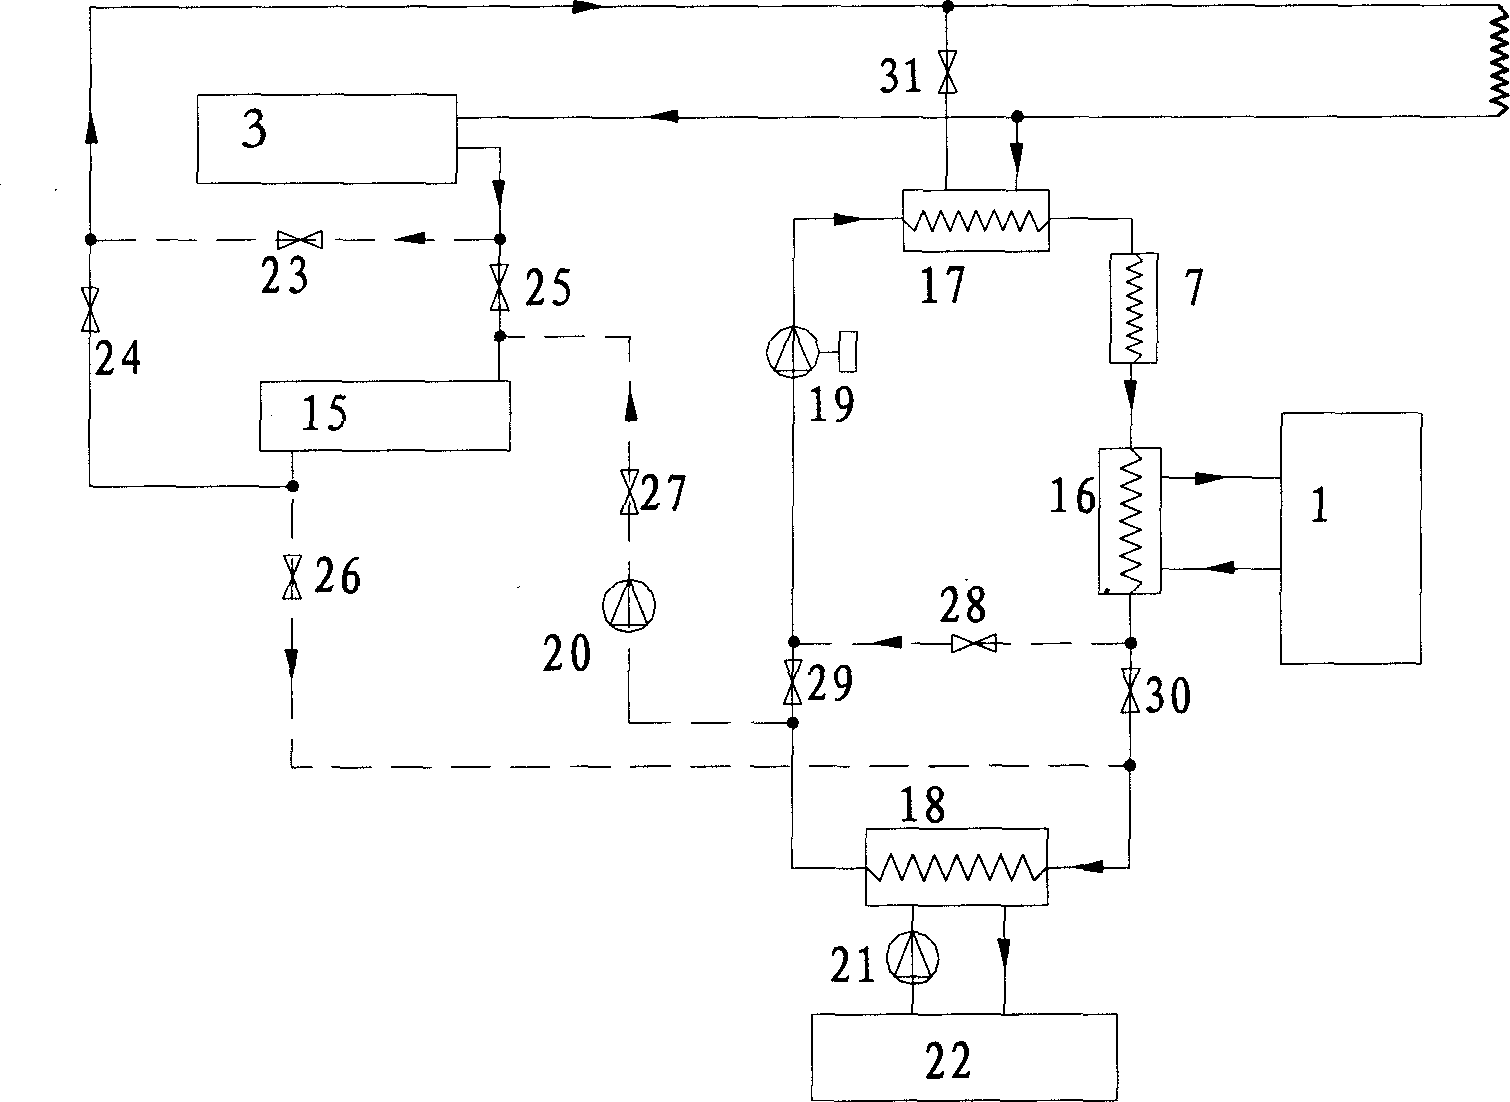 Gas-fired heat pump system of water source